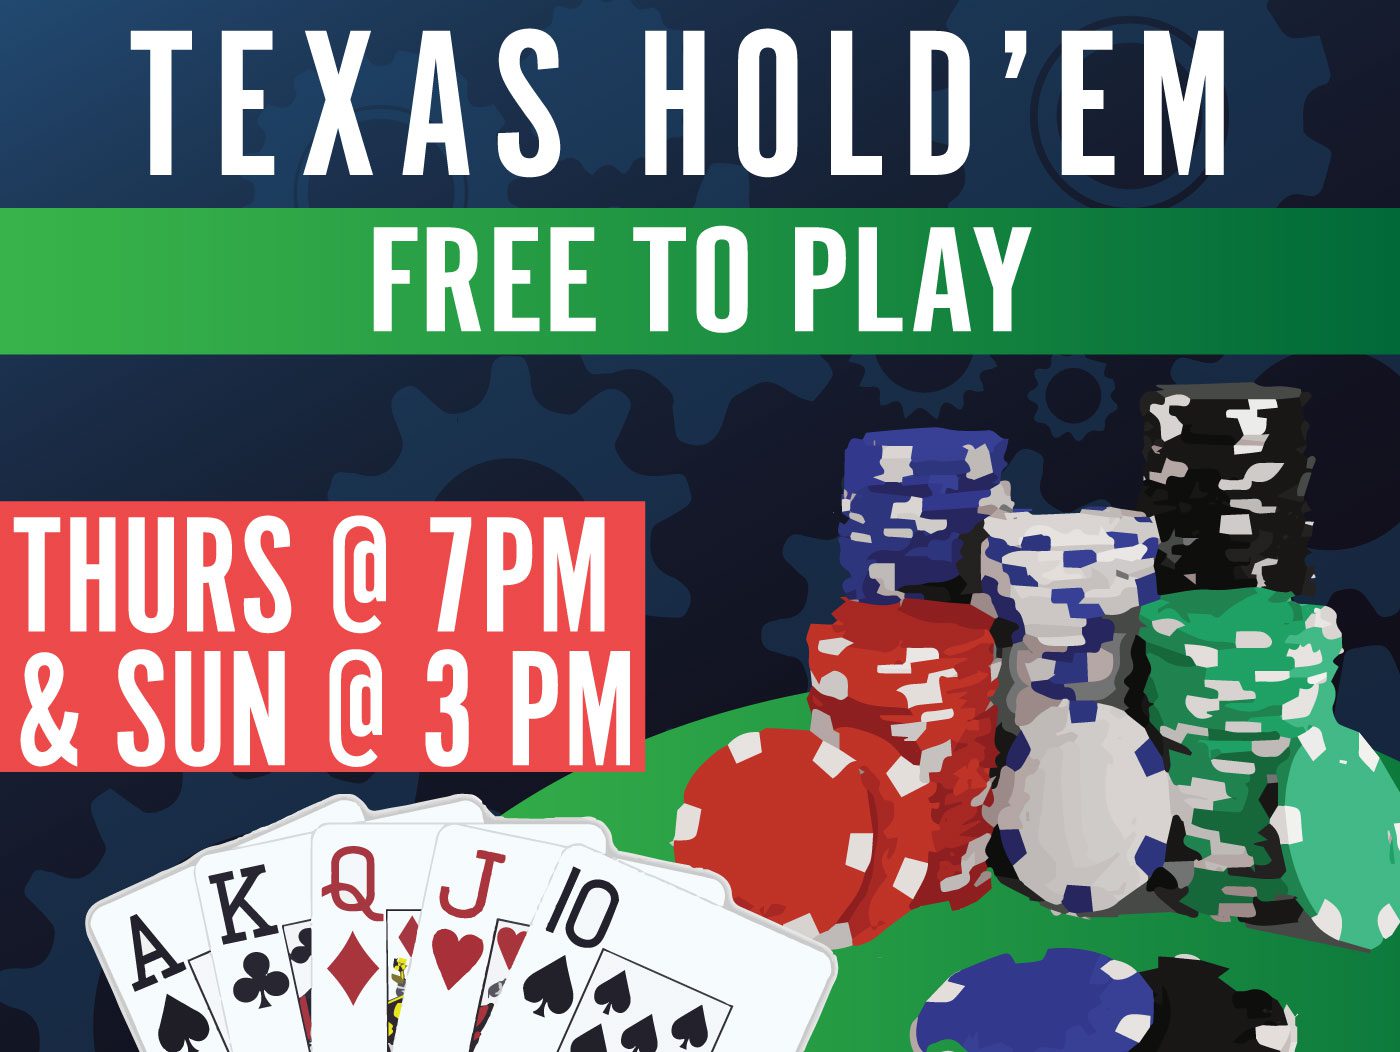 Motorworks Brewing presents Texas Hold'Em - Free to play every Thursday @ 7:00 pm EST and Sunday @ 3:00 pm EST